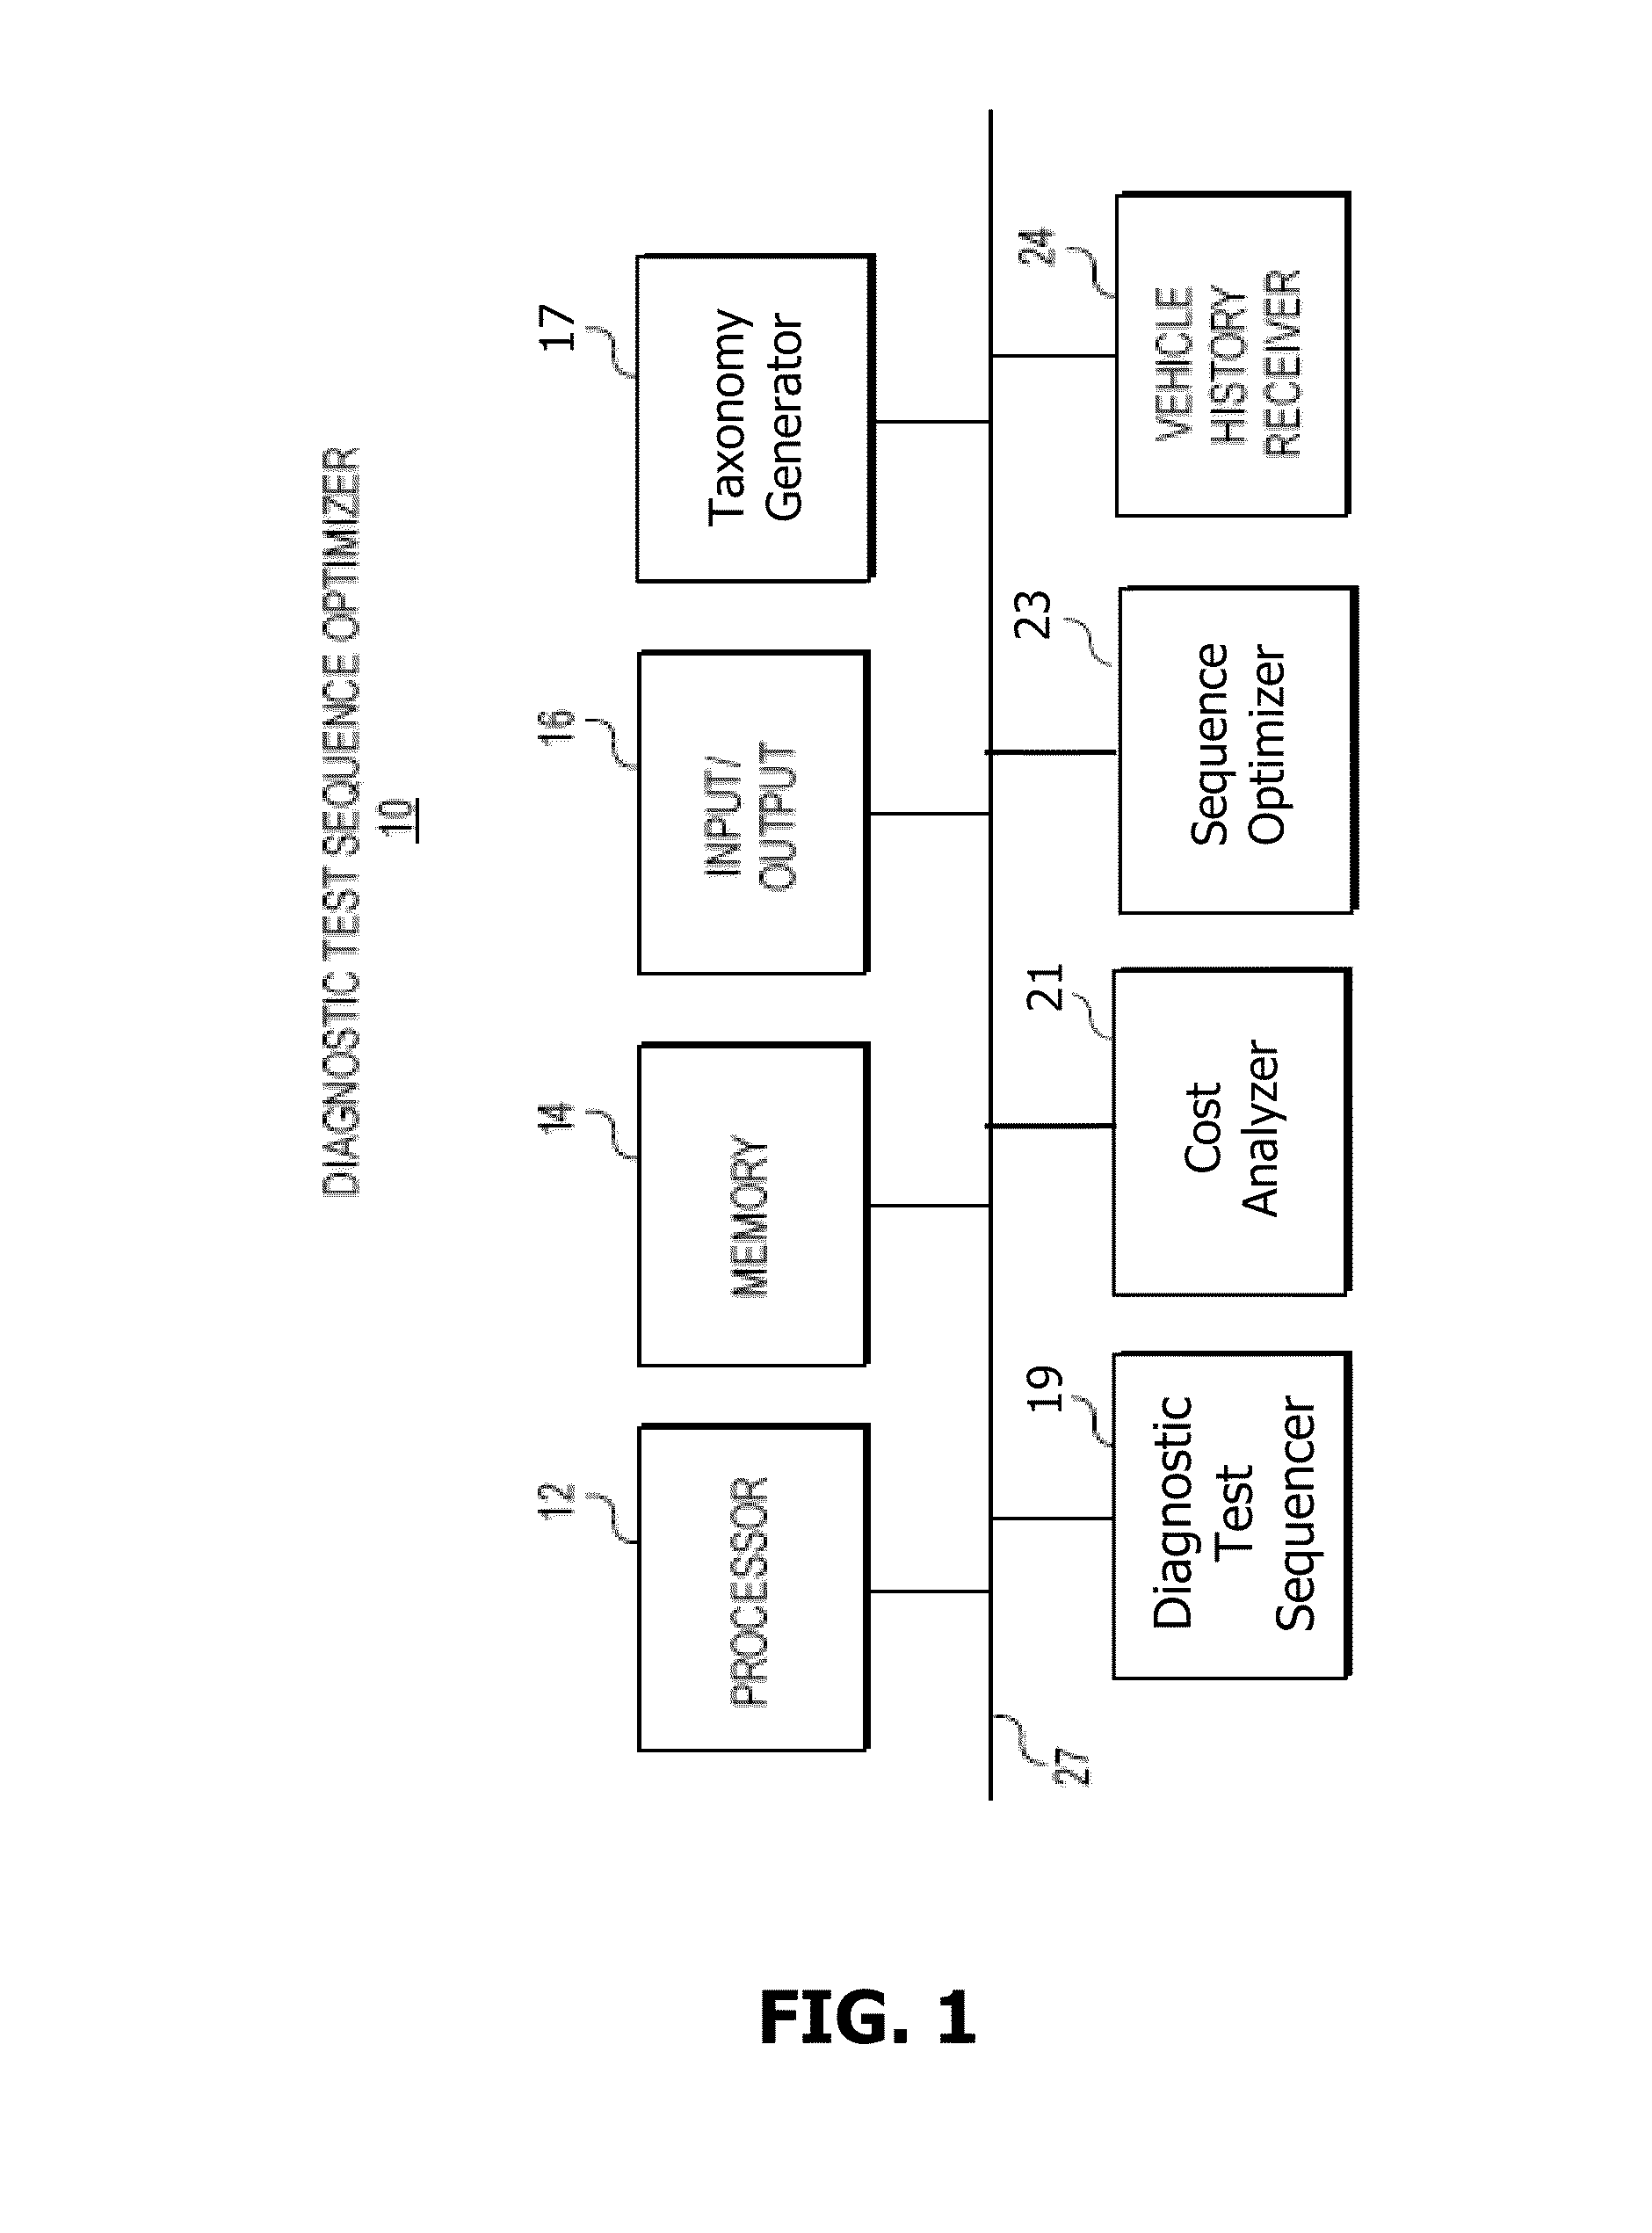 Diagnostic Test Sequence Optimization Method and Apparatus